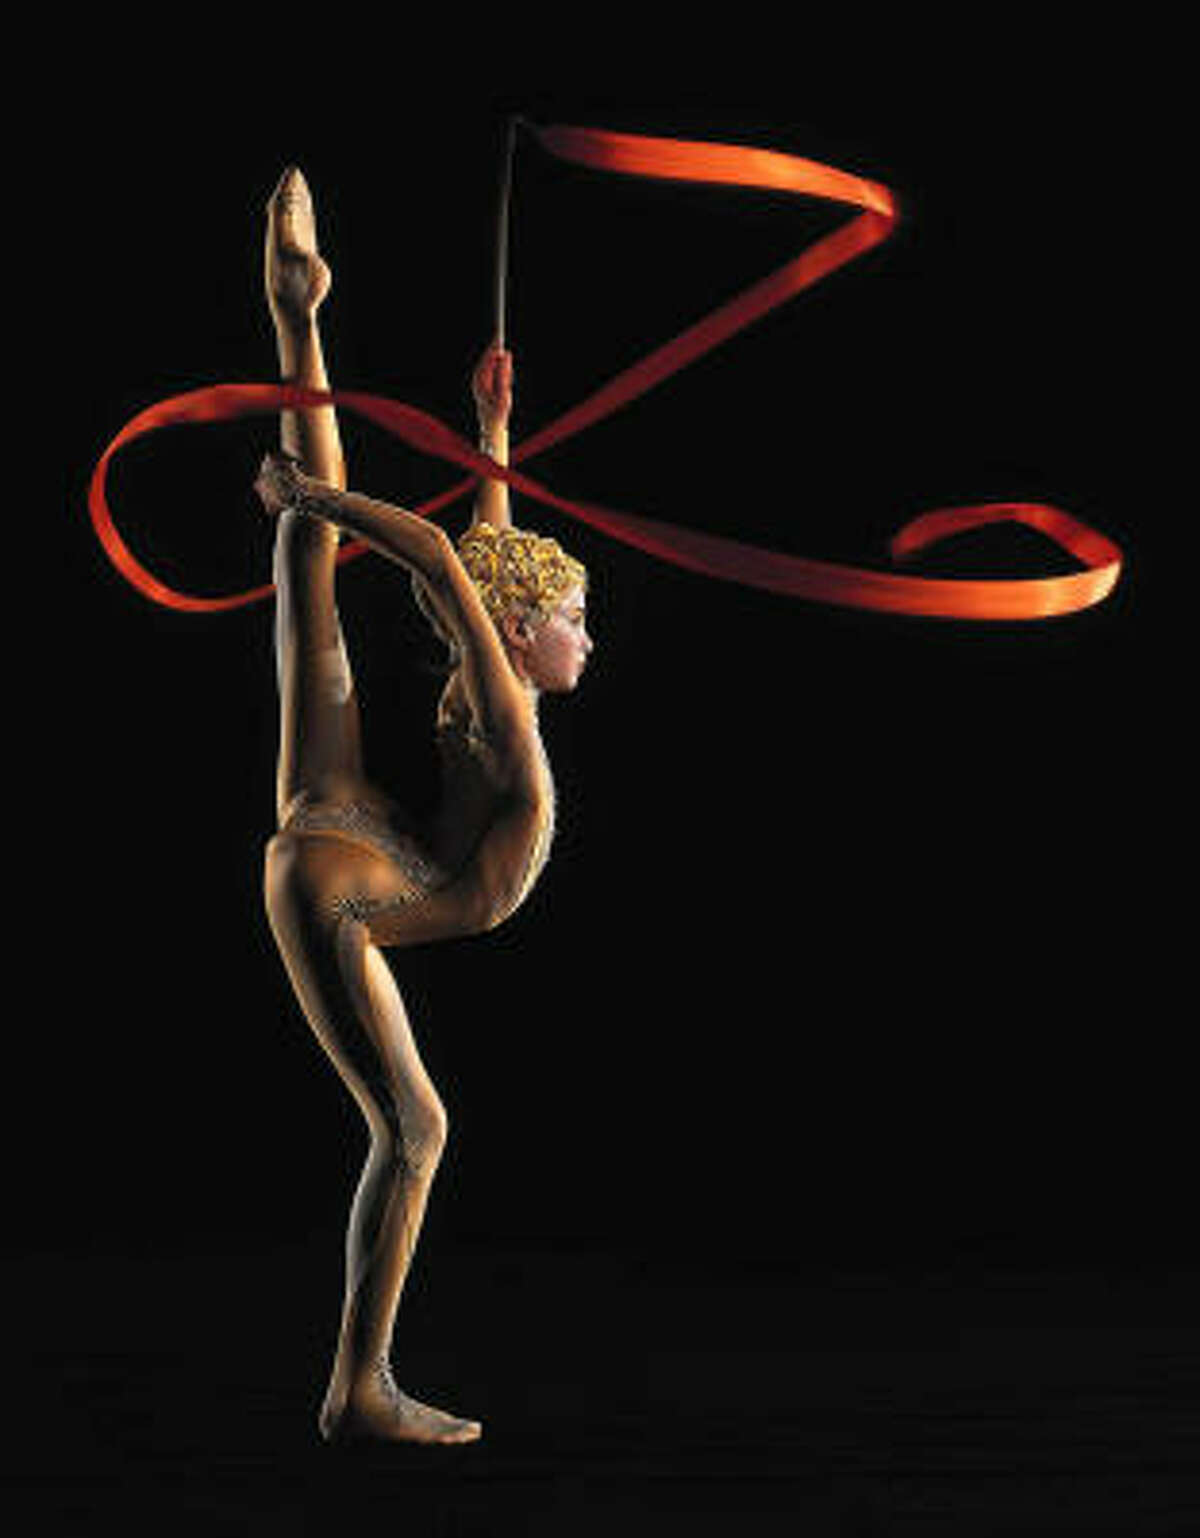 One part of "Alegria" combines rhythmic gymnastics, flexible contortion, deft juggling and graceful ballet into a single act.